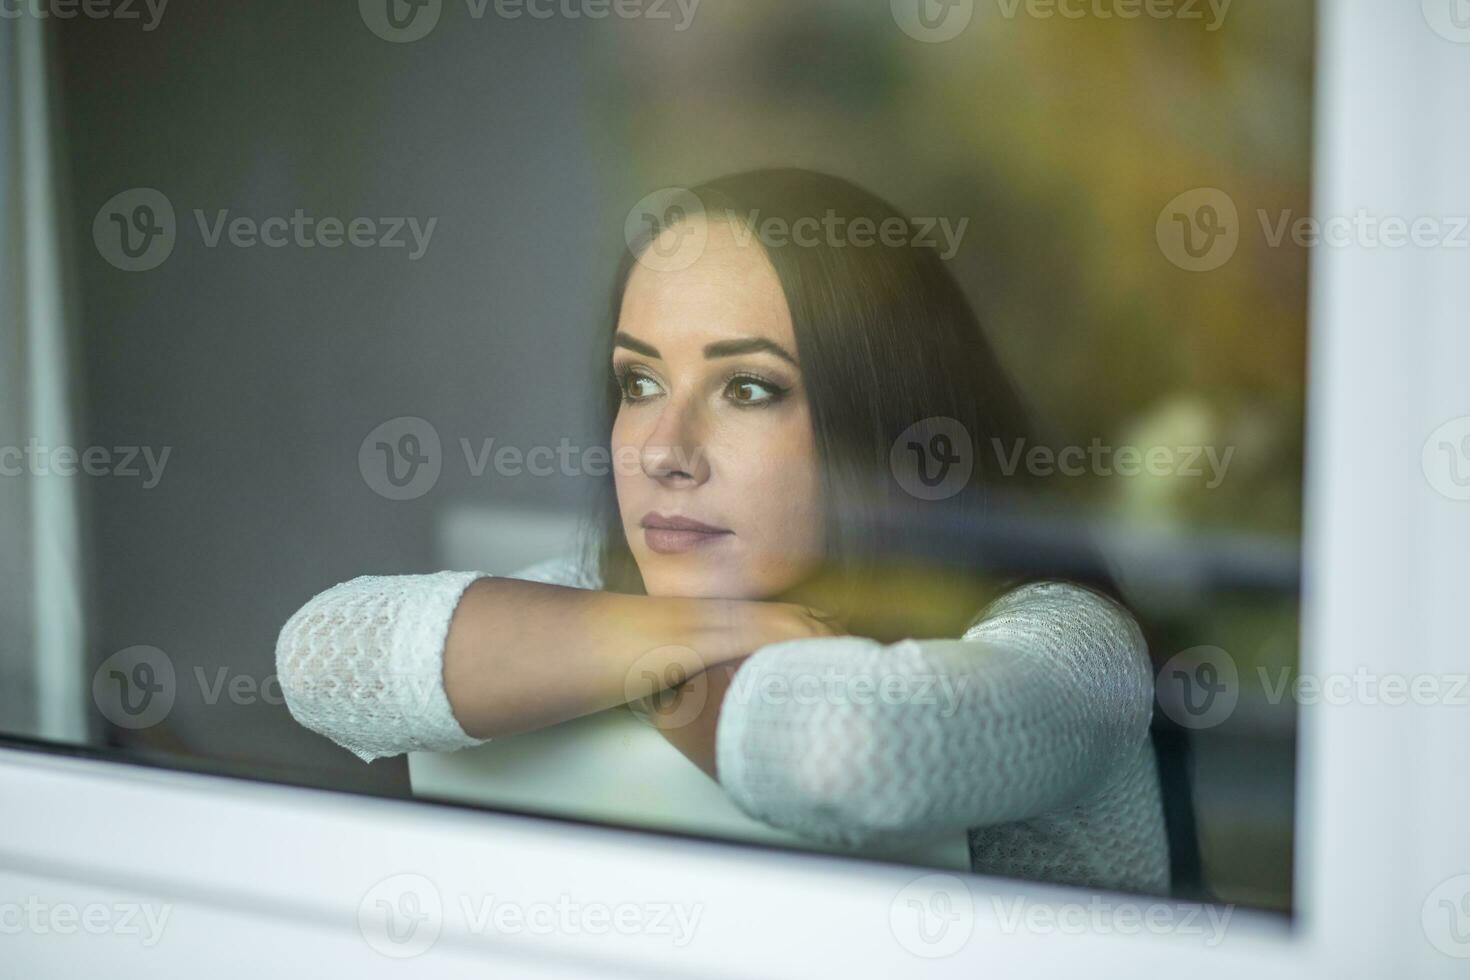 Sad good-looking female sits on a chair behind the window looking outside photo